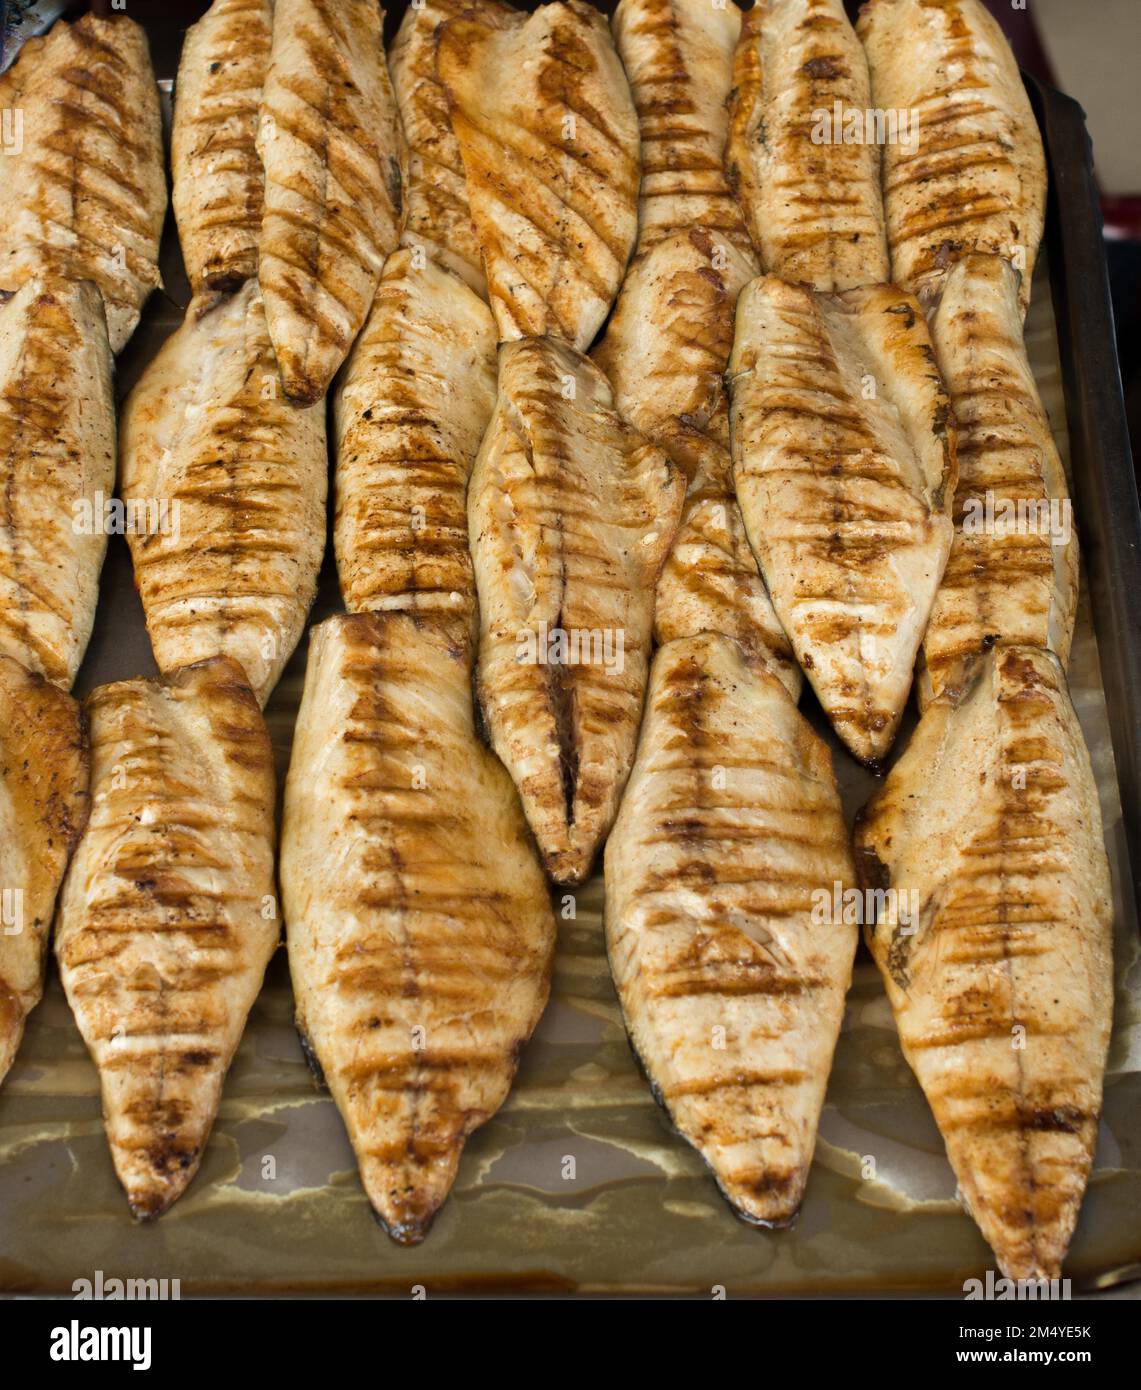 Fish on the grill as seafood ready to eat Stock Photo